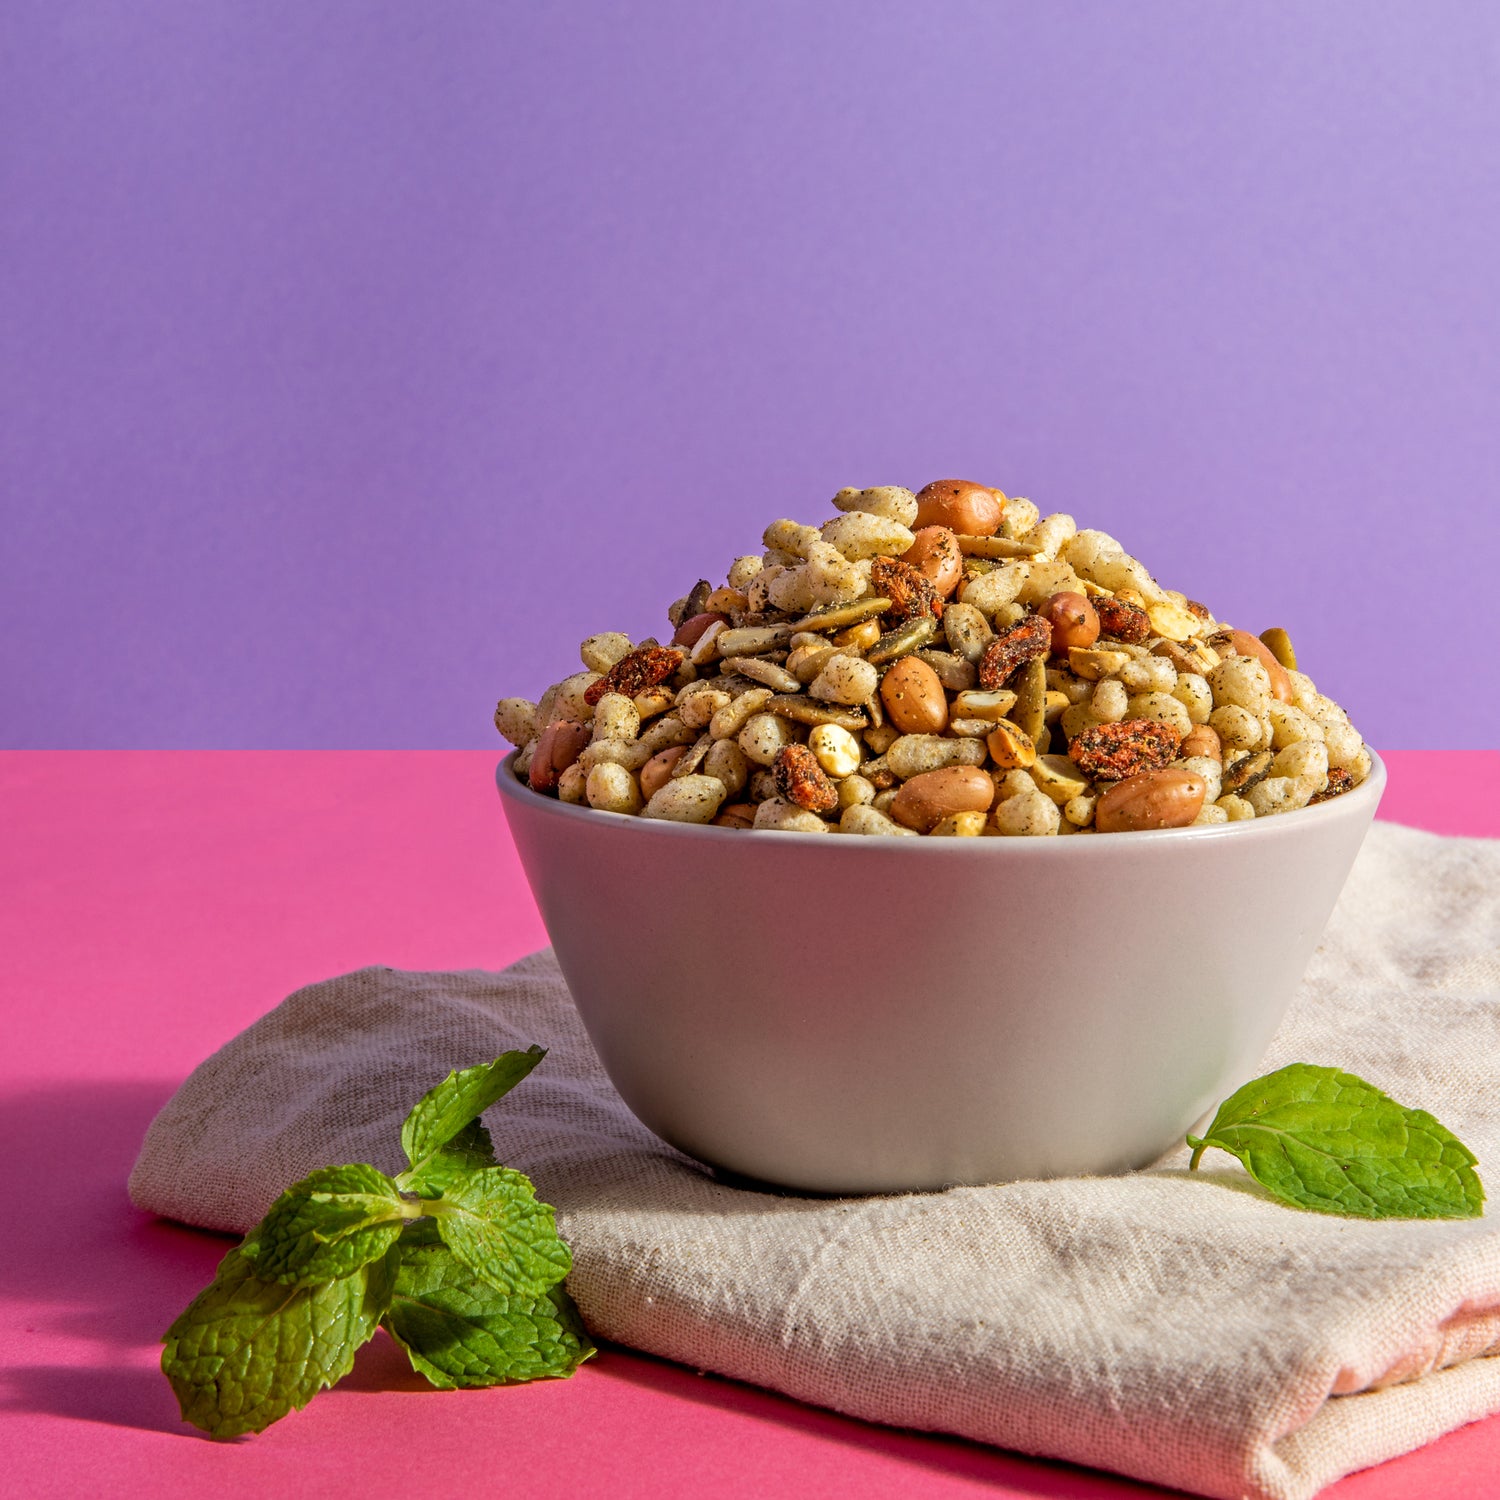 Mint bhel in a white bowl